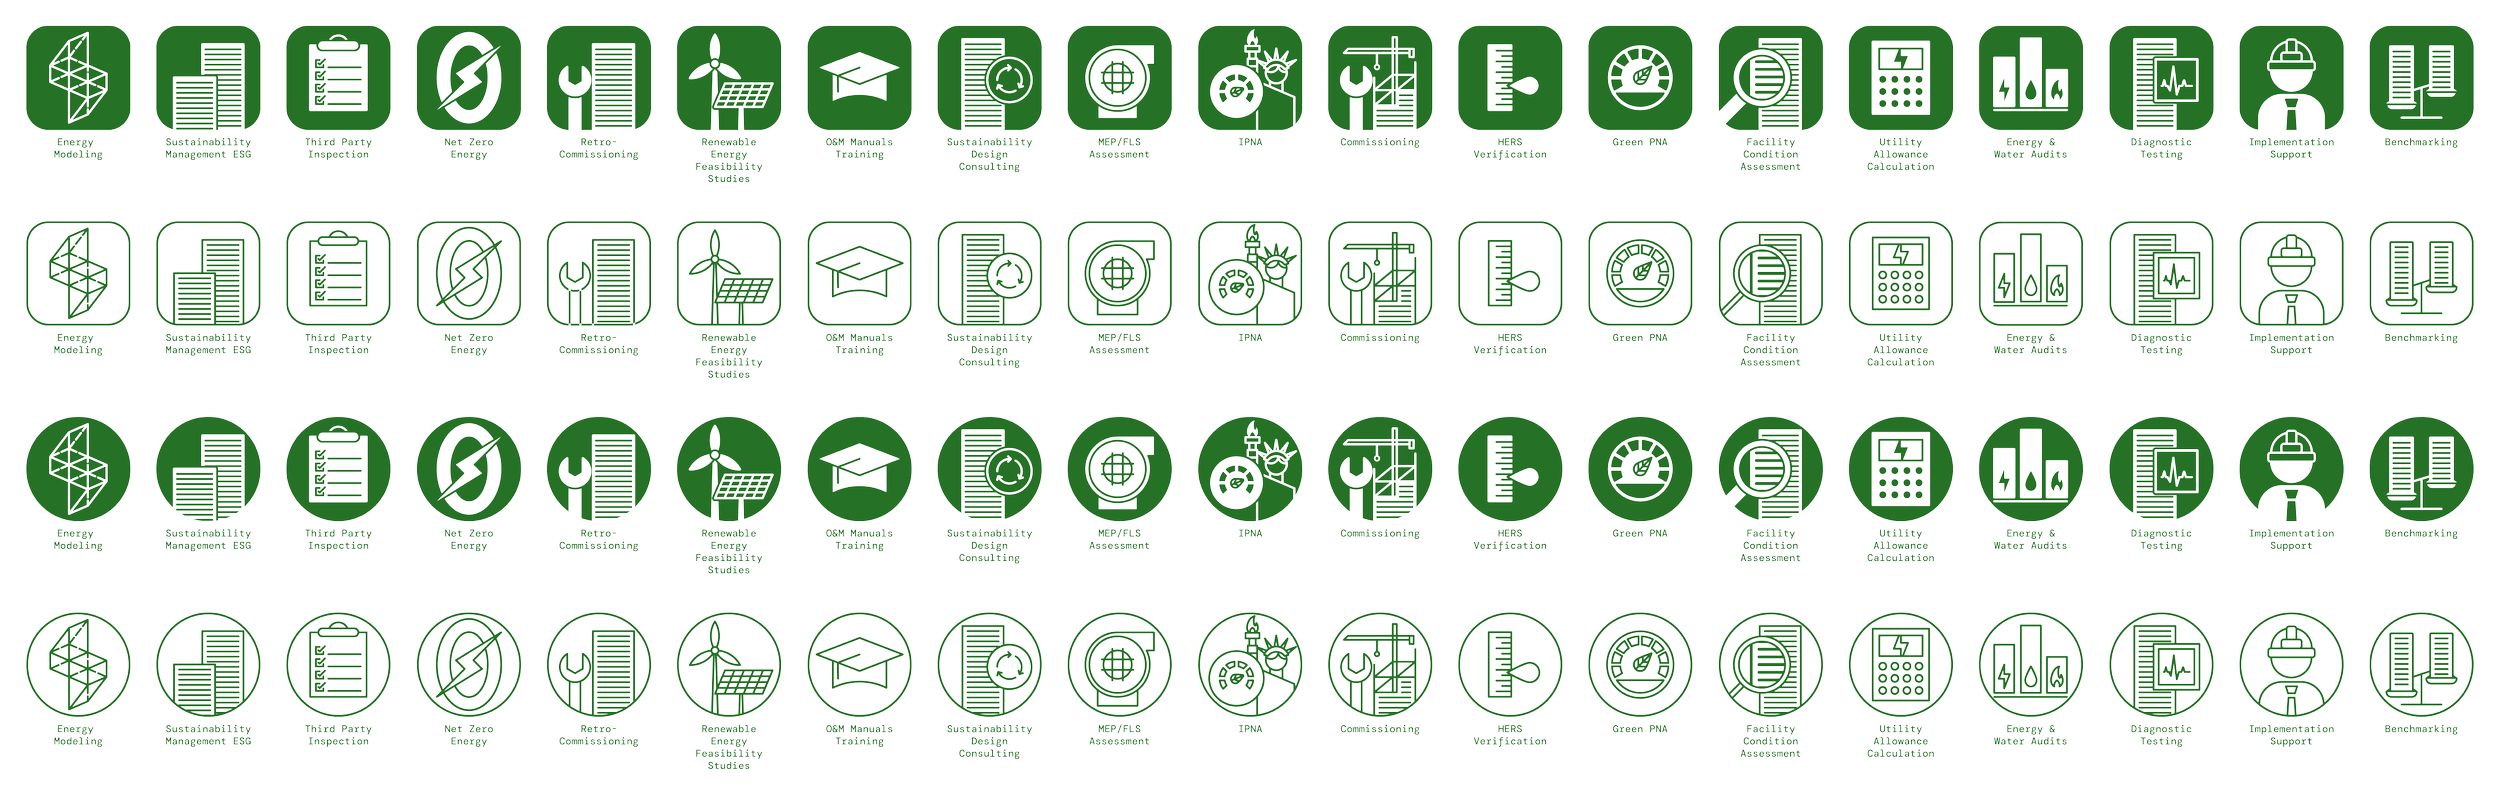 PTE Icons - Arranged-04.png